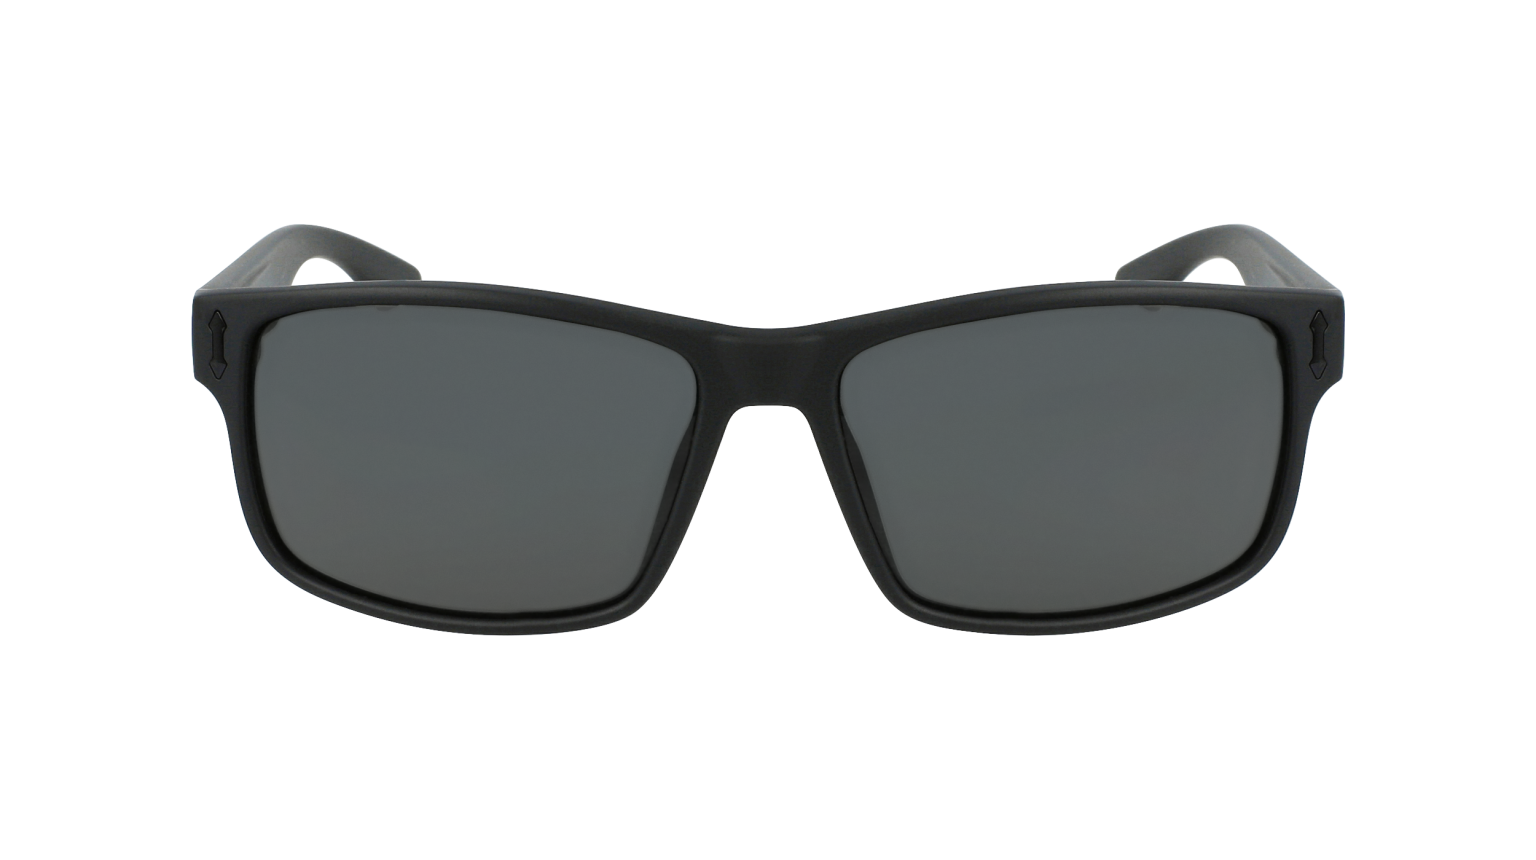 COUNT - Matte Black with Lumalens Smoke Lens